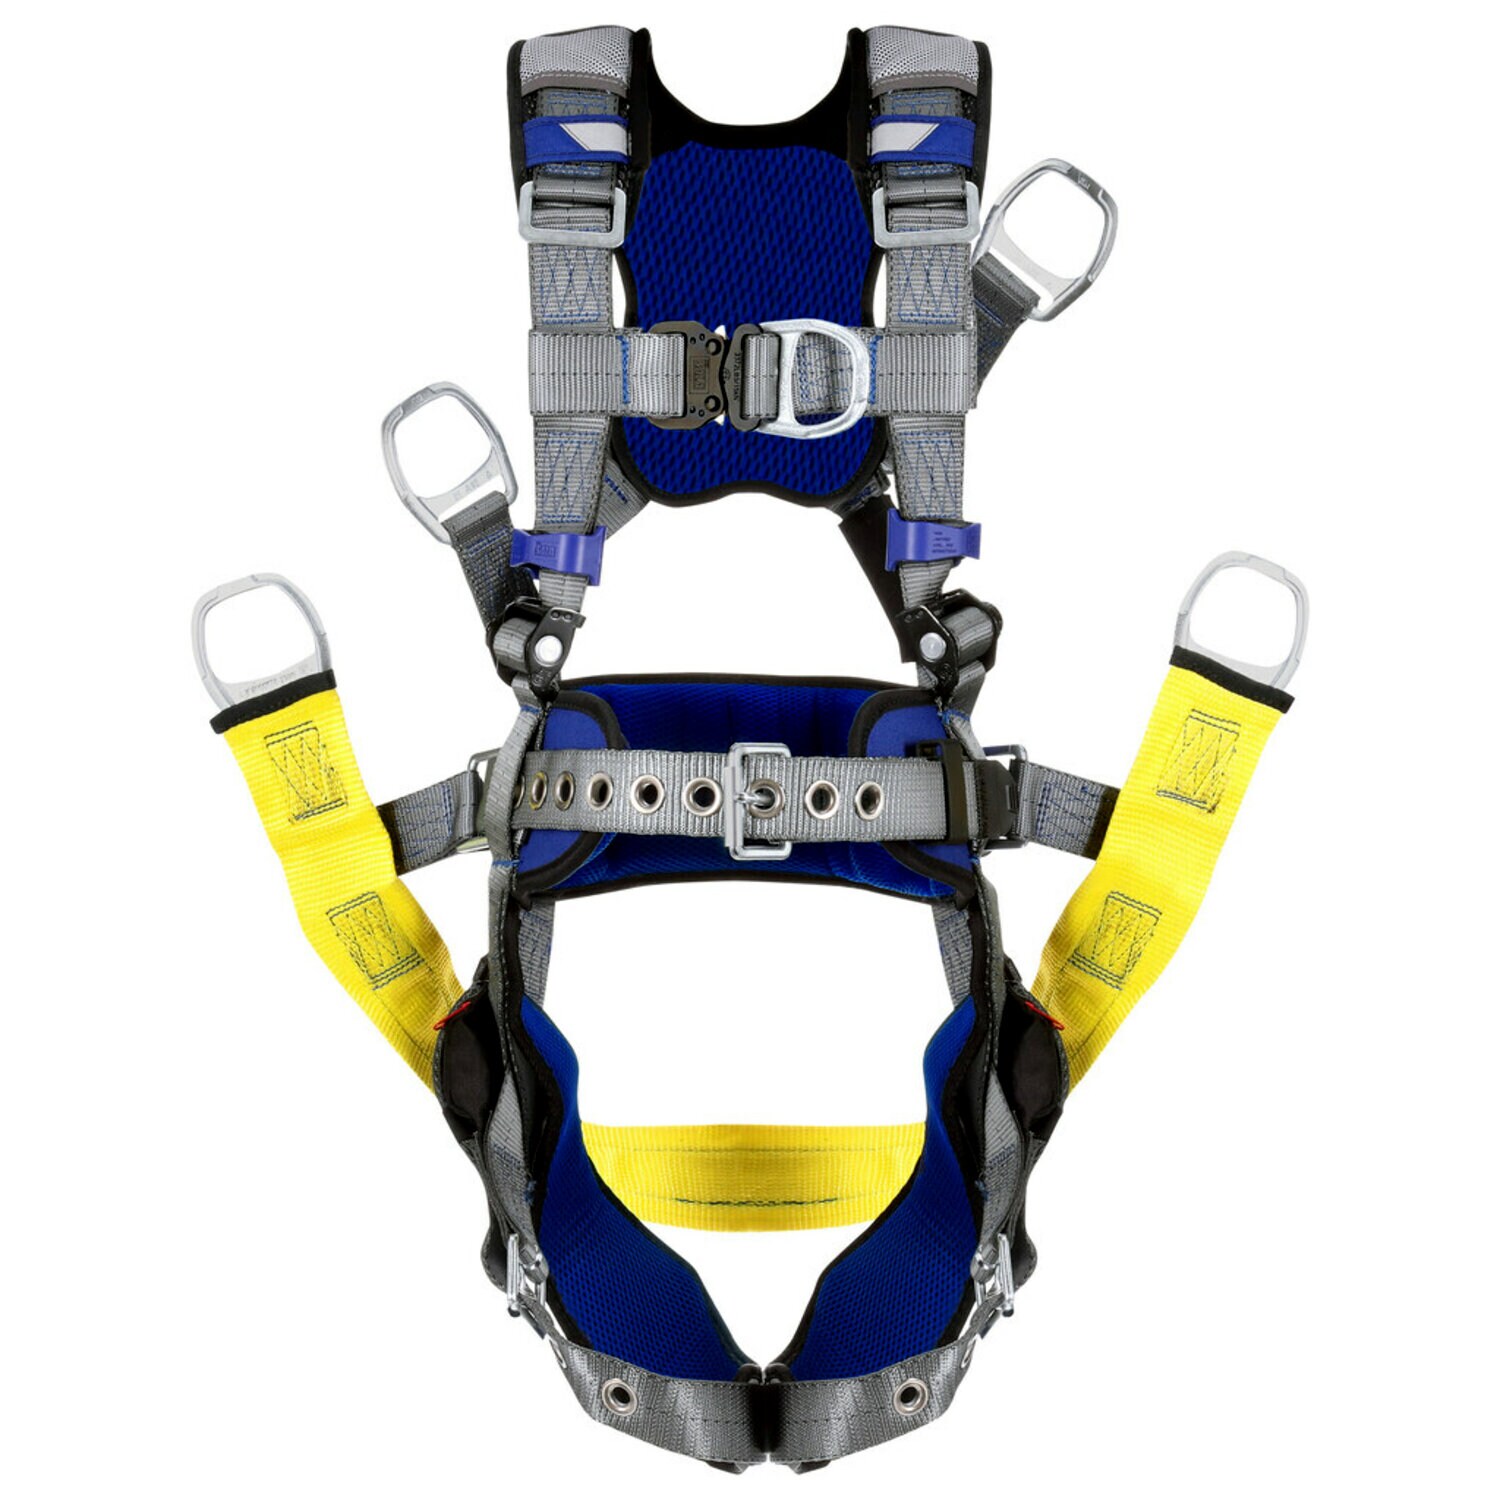 7012817794 - 3M DBI-SALA ExoFit X200 Comfort Tower Climbing/Suspension Safety Harness with Back D-ring Extension 1402056, Small